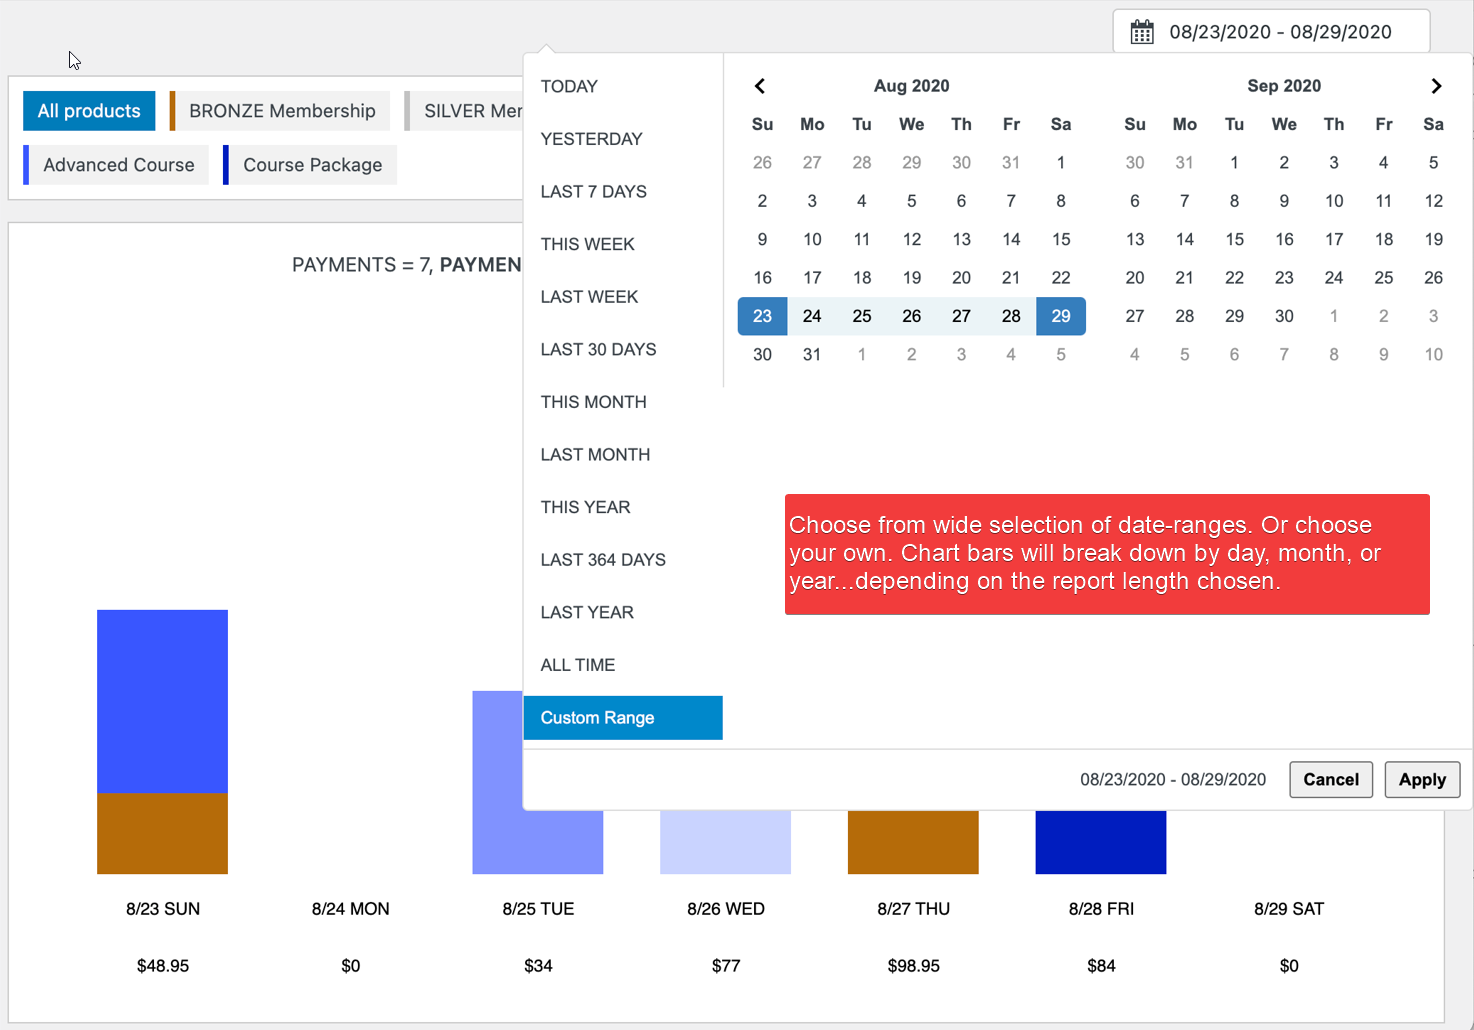 Daily/Monthly/Yearly report view based on wide selection of date-ranges.